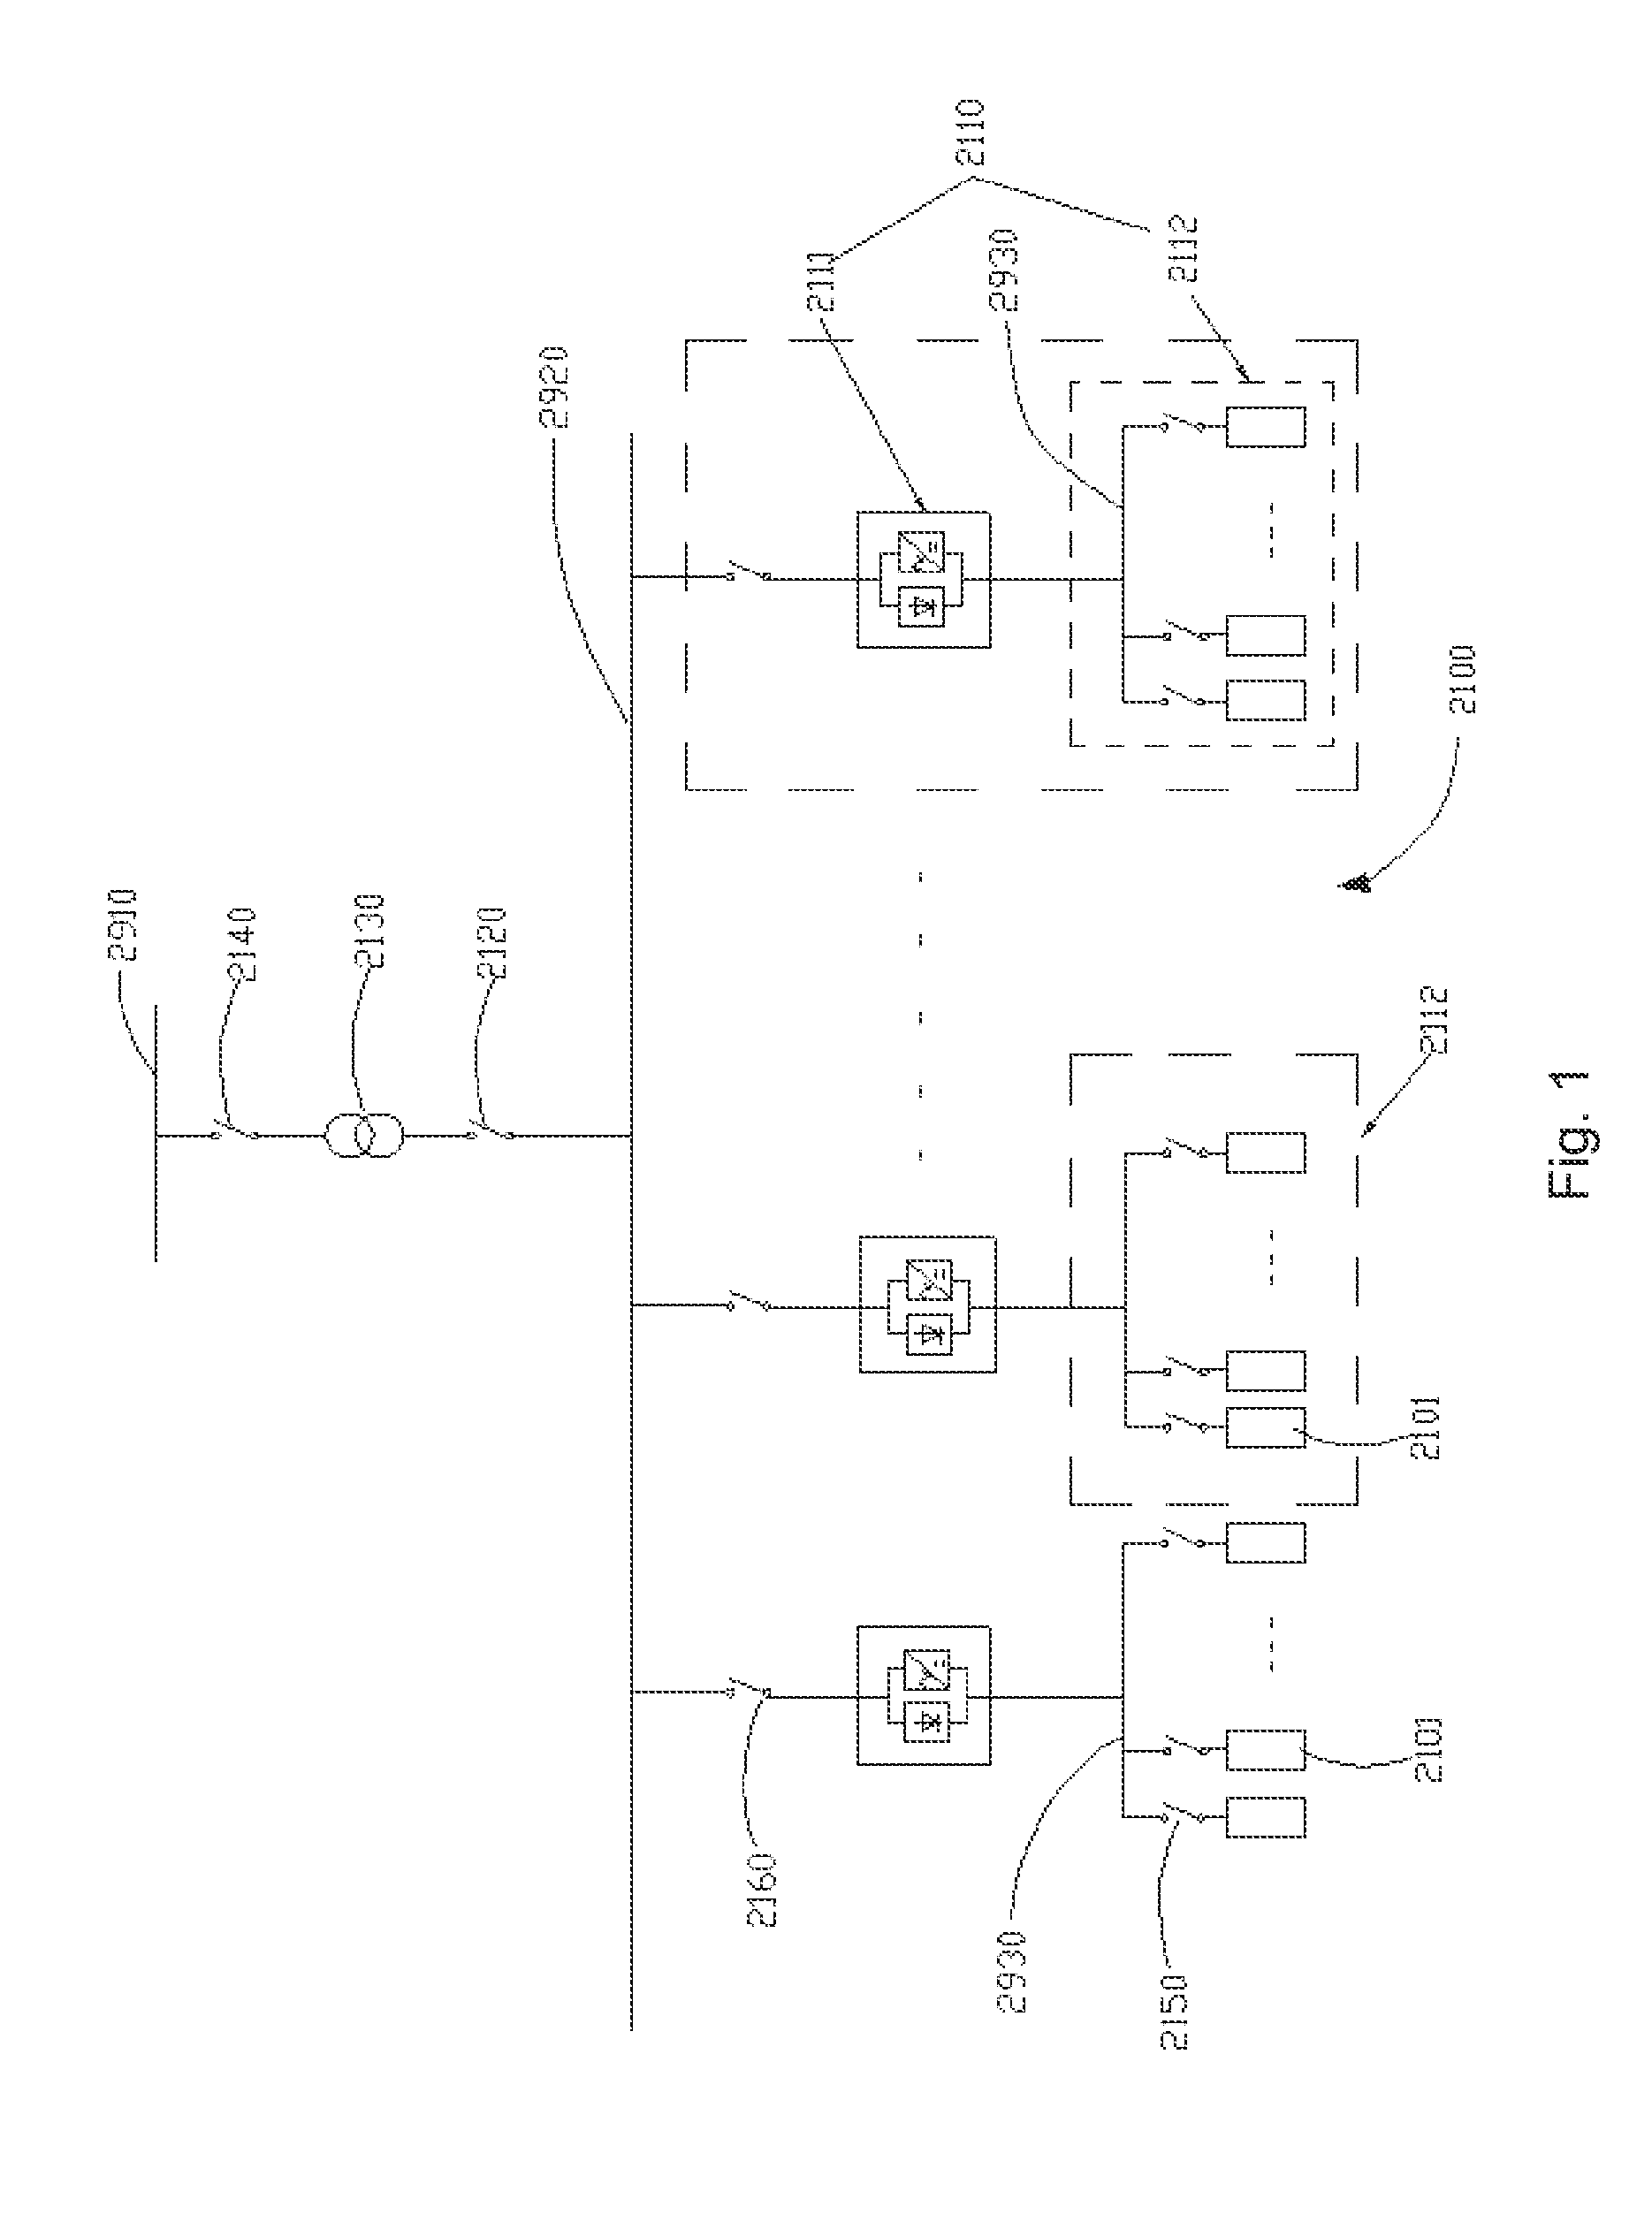 Method and system for supplying emergency power to nuclear power plant